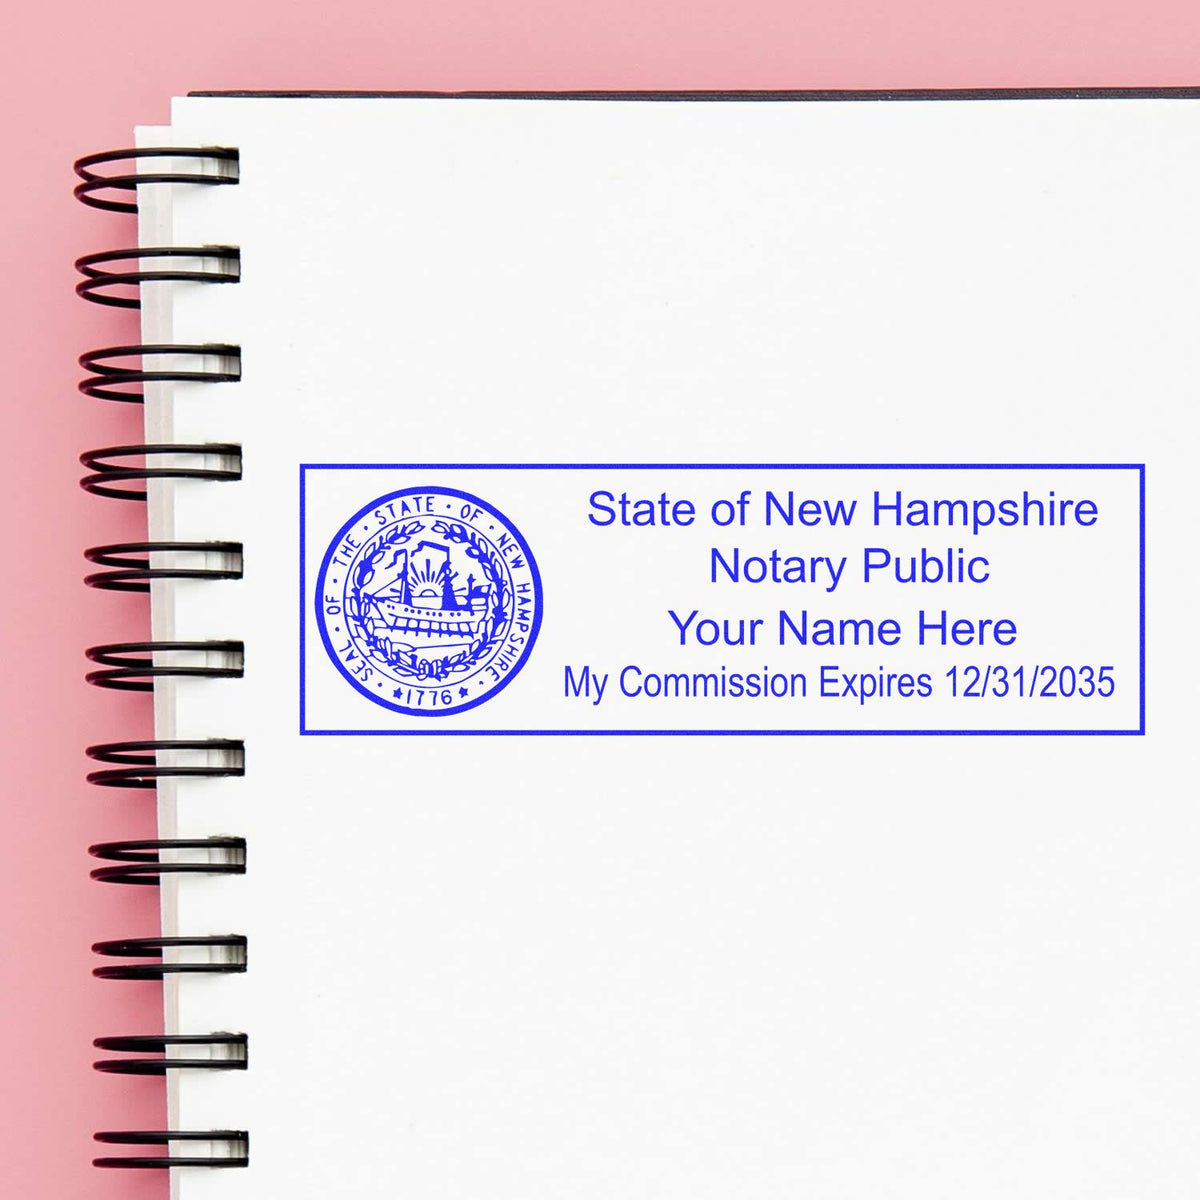 A lifestyle photo showing a stamped image of the Wooden Handle New Hampshire State Seal Notary Public Stamp on a piece of paper